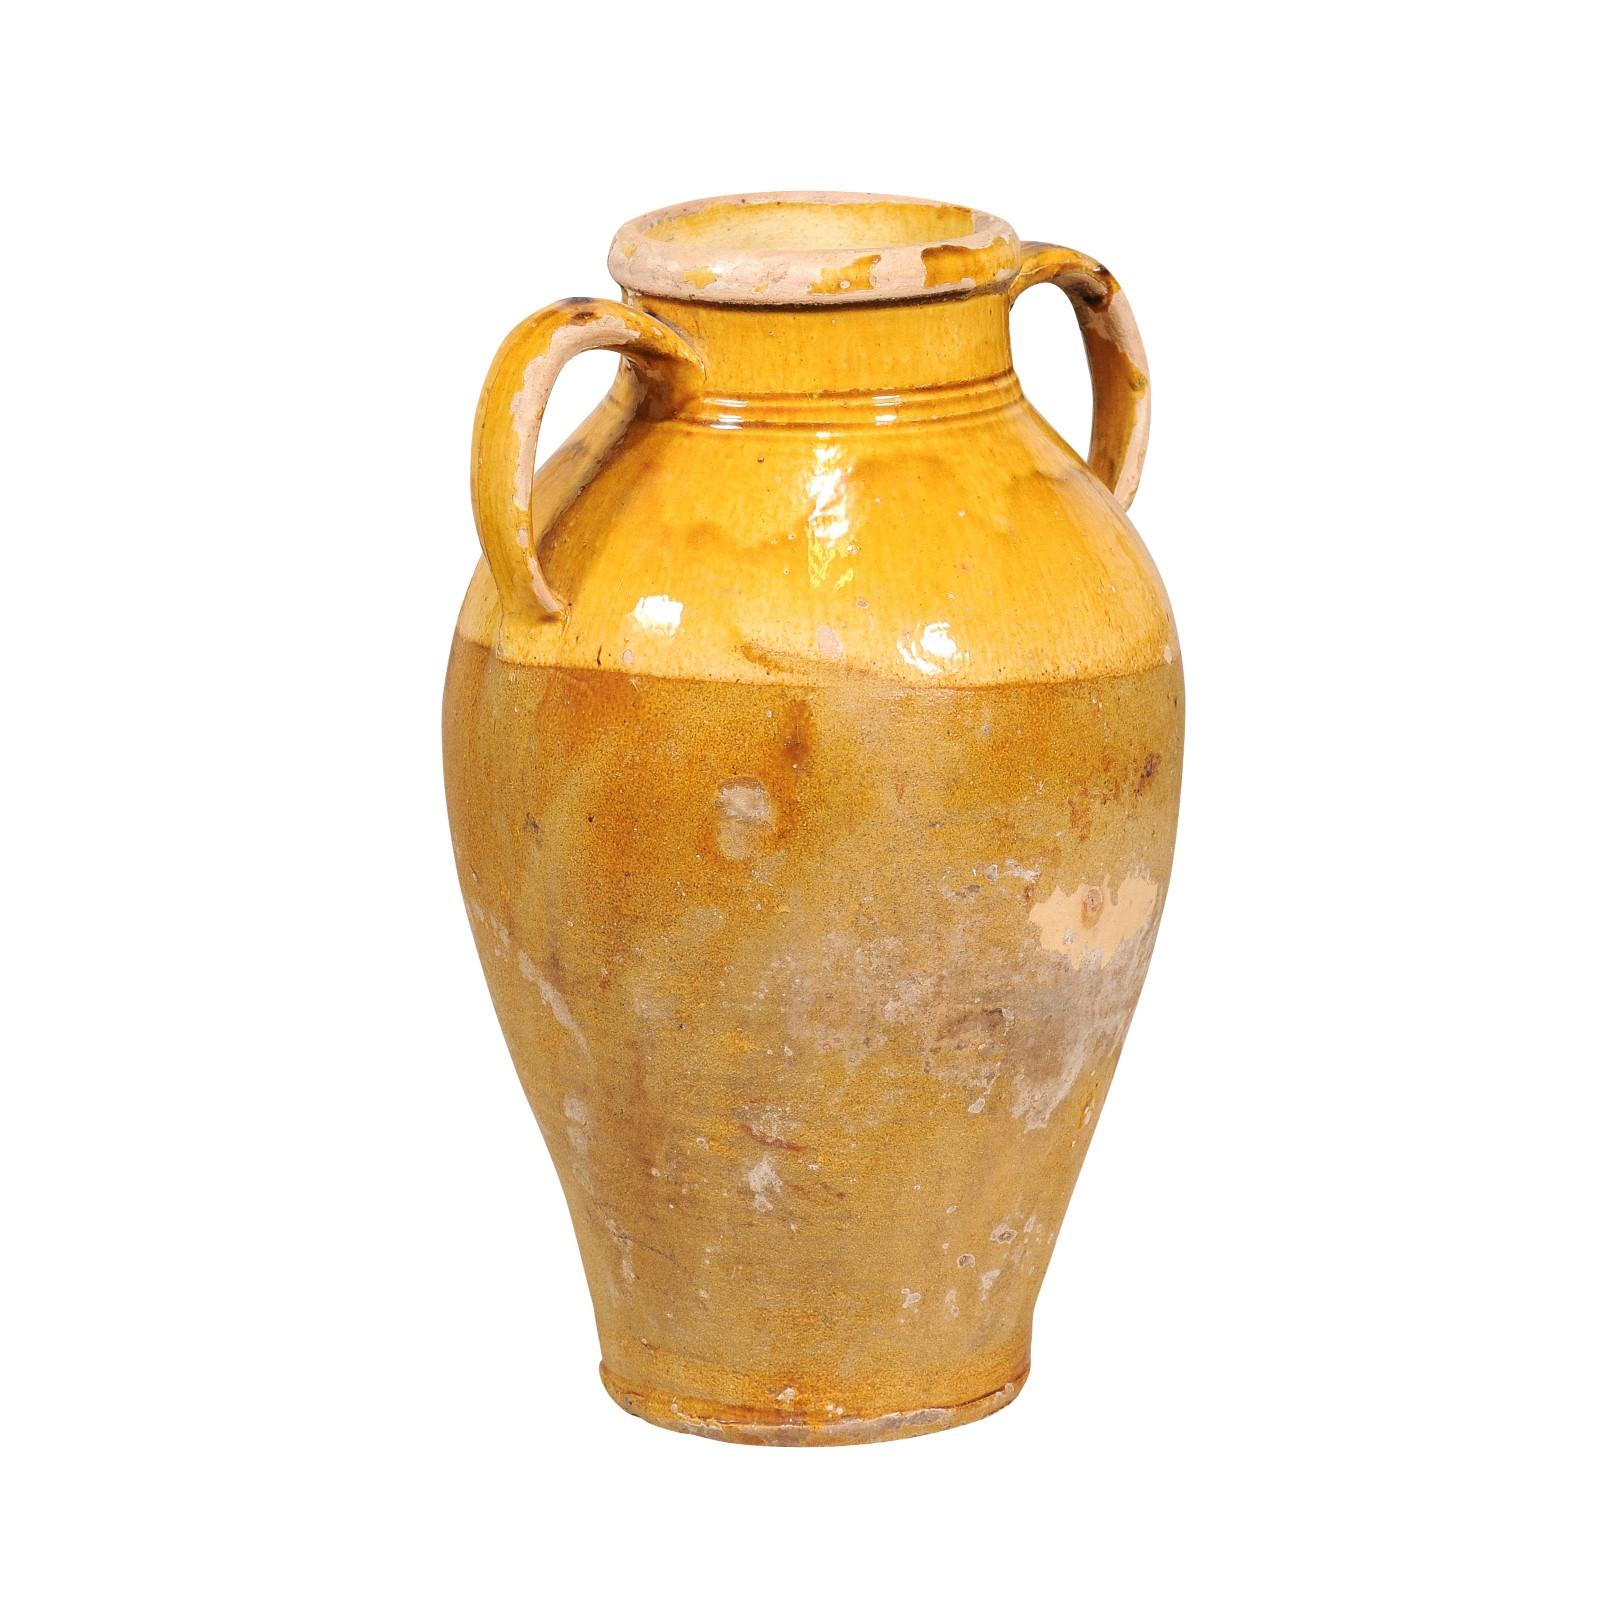 An Italian pottery pot from the 20th century with yellow glaze, two large handles and tapering lines. This Italian pottery pot from the 20th century is a vibrant blend of functional design and rustic charm. With its sun-kissed yellow glaze adorning